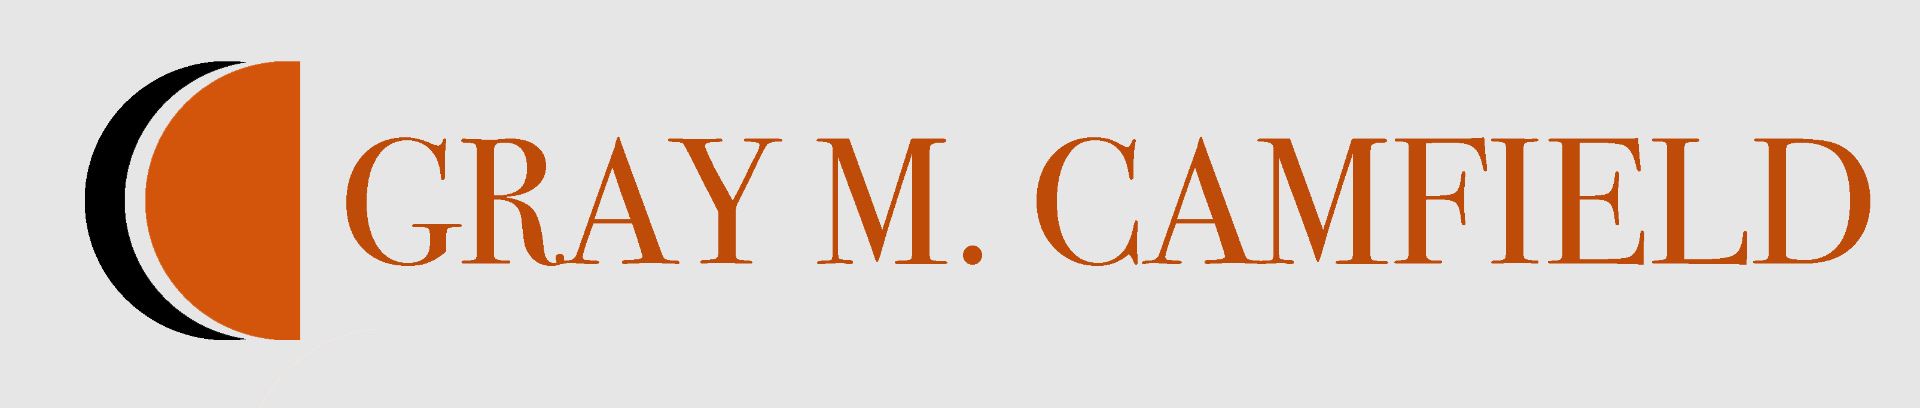 The Law Office of Gray M. Camfield's Logo